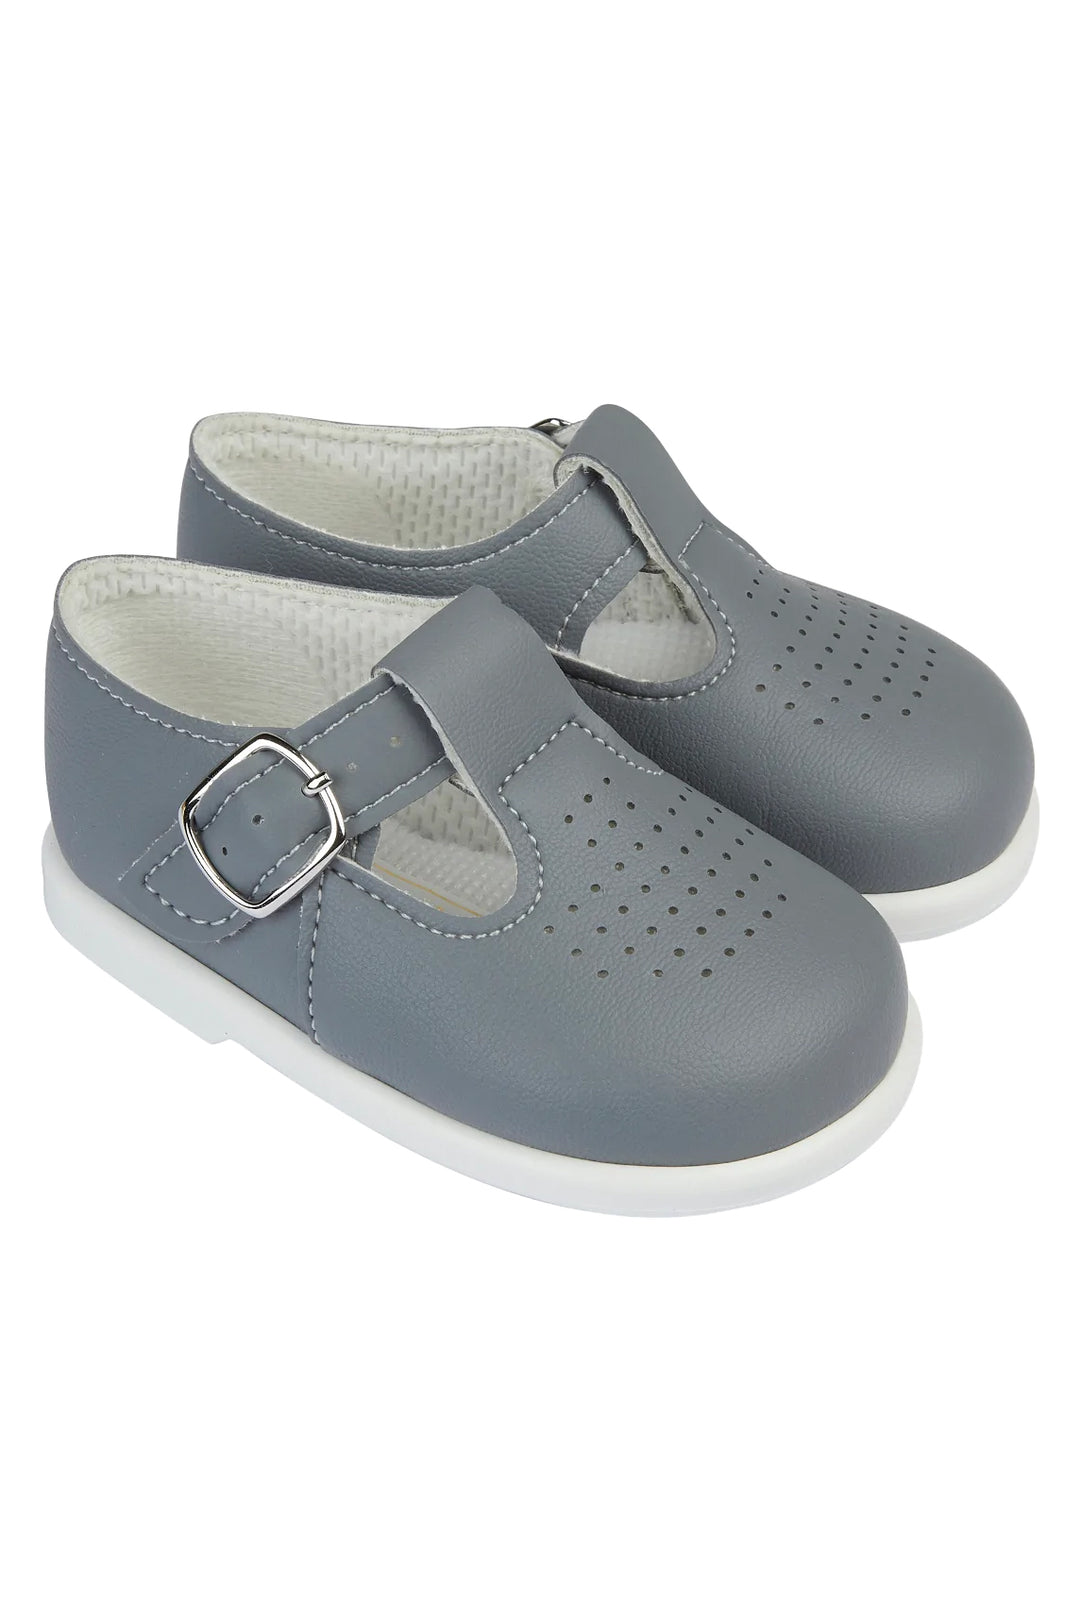 Baypods Grey T-Bar Hard Sole Shoes | iphoneandroidapplications